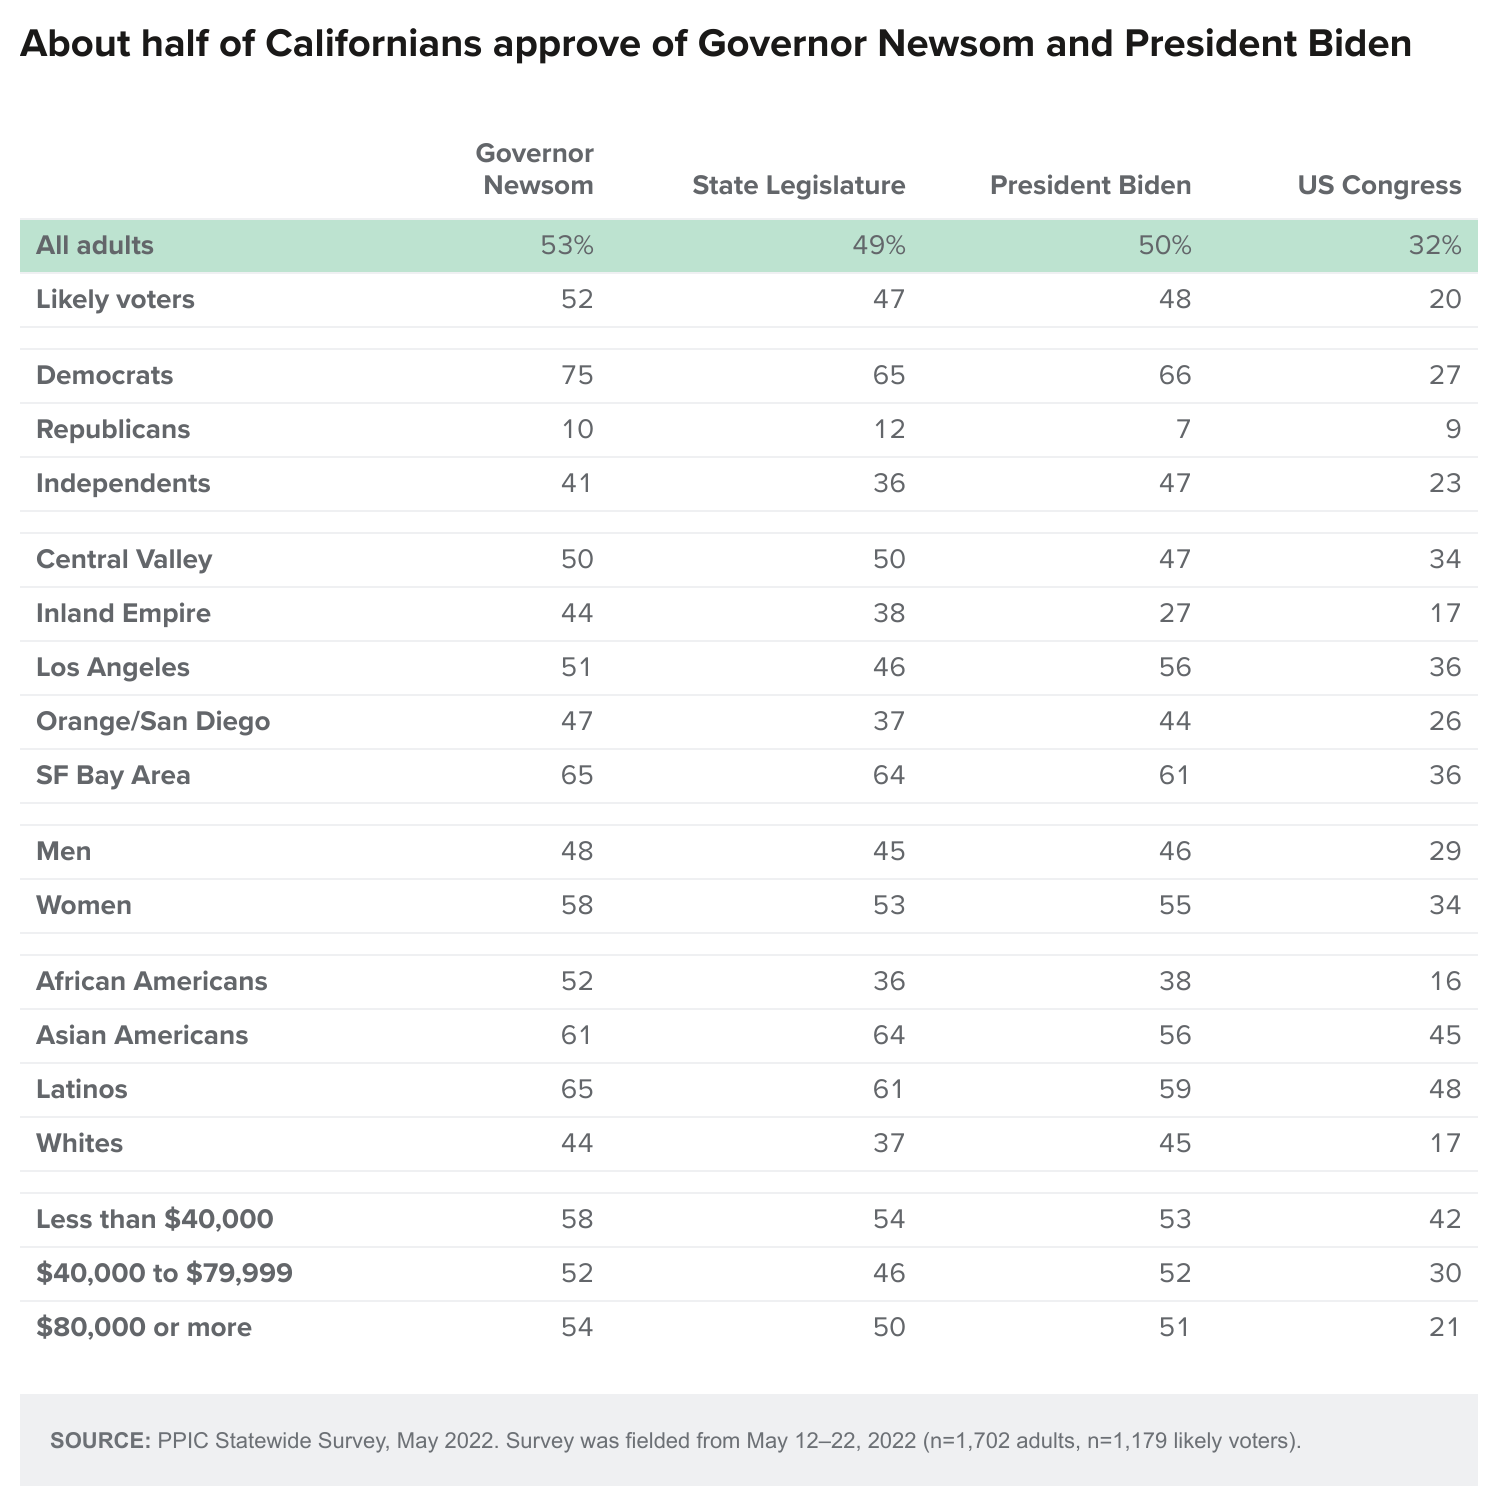 table - About half of Californians approve of Governor Newsom and President Biden